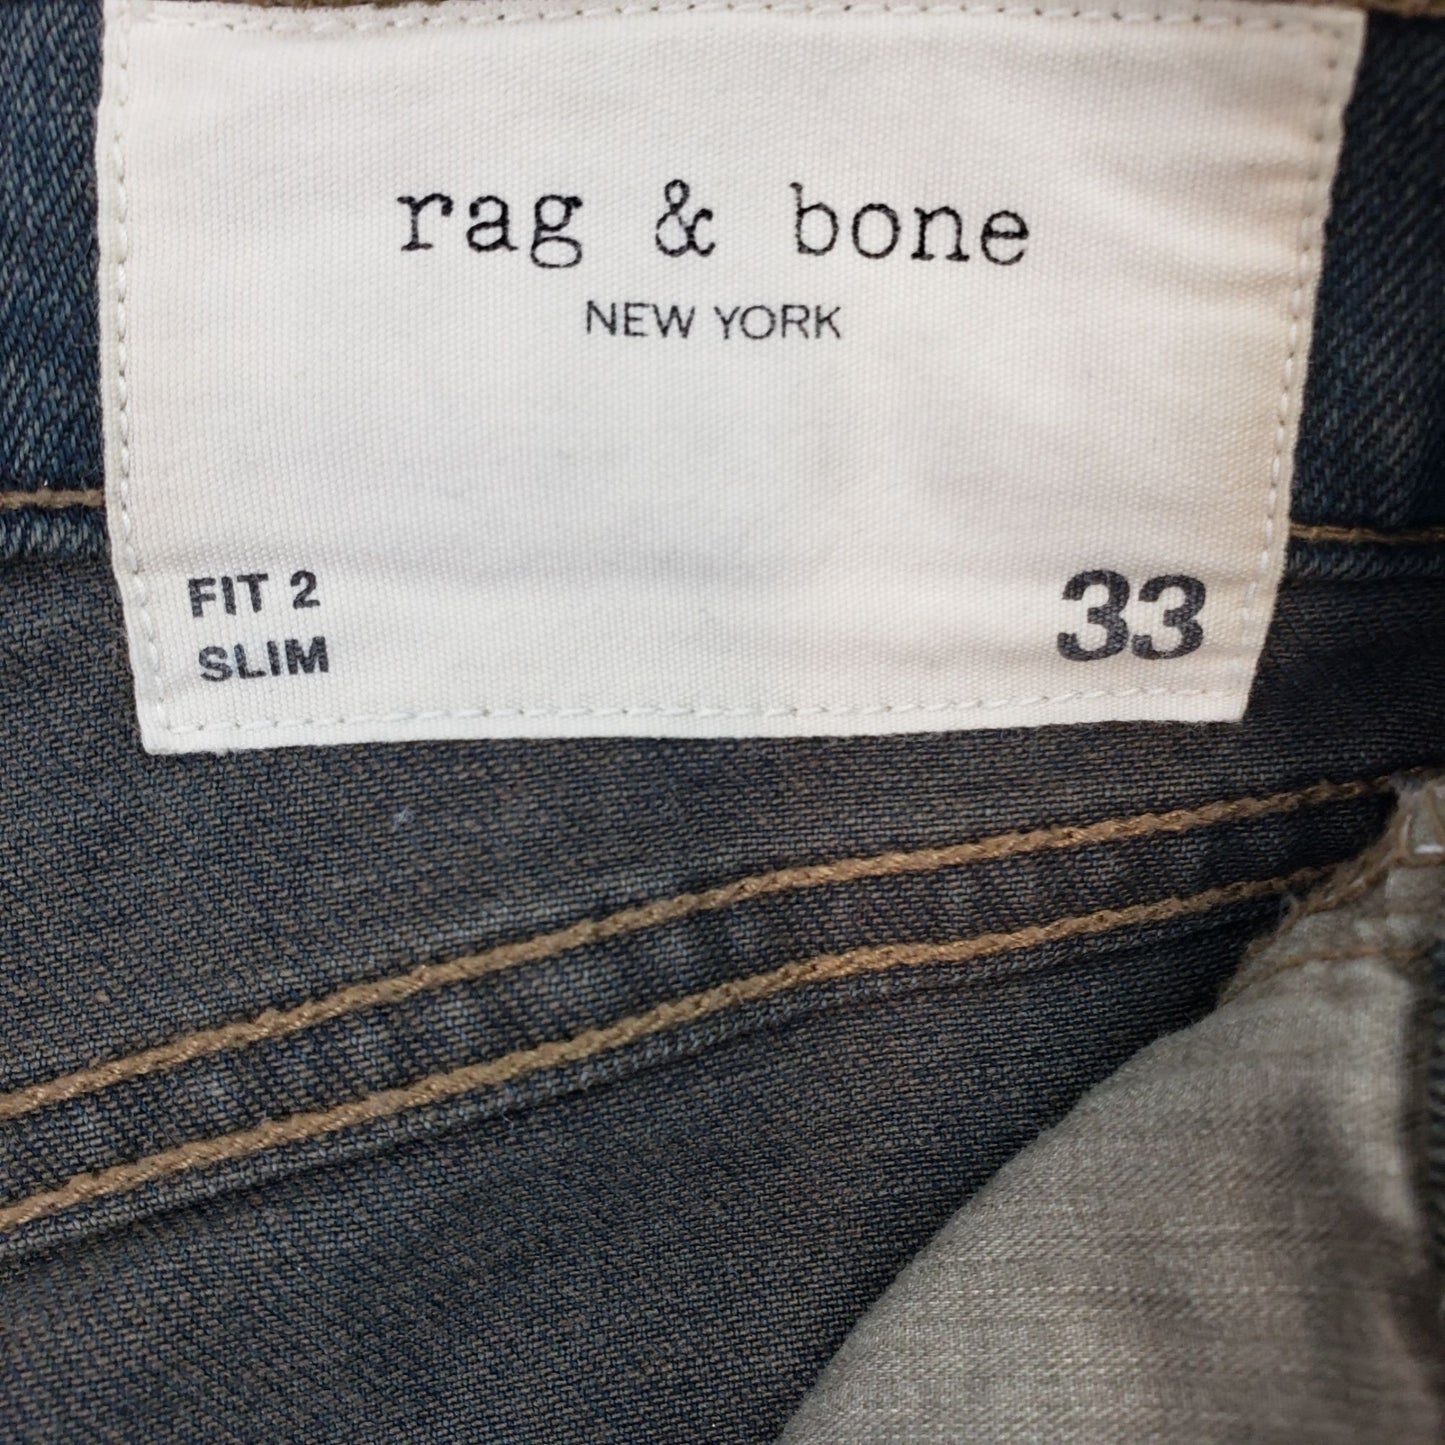 Rag & Bone Fit 2 Slim Fit Button Fly Jeans in Kimbell Size 33x31